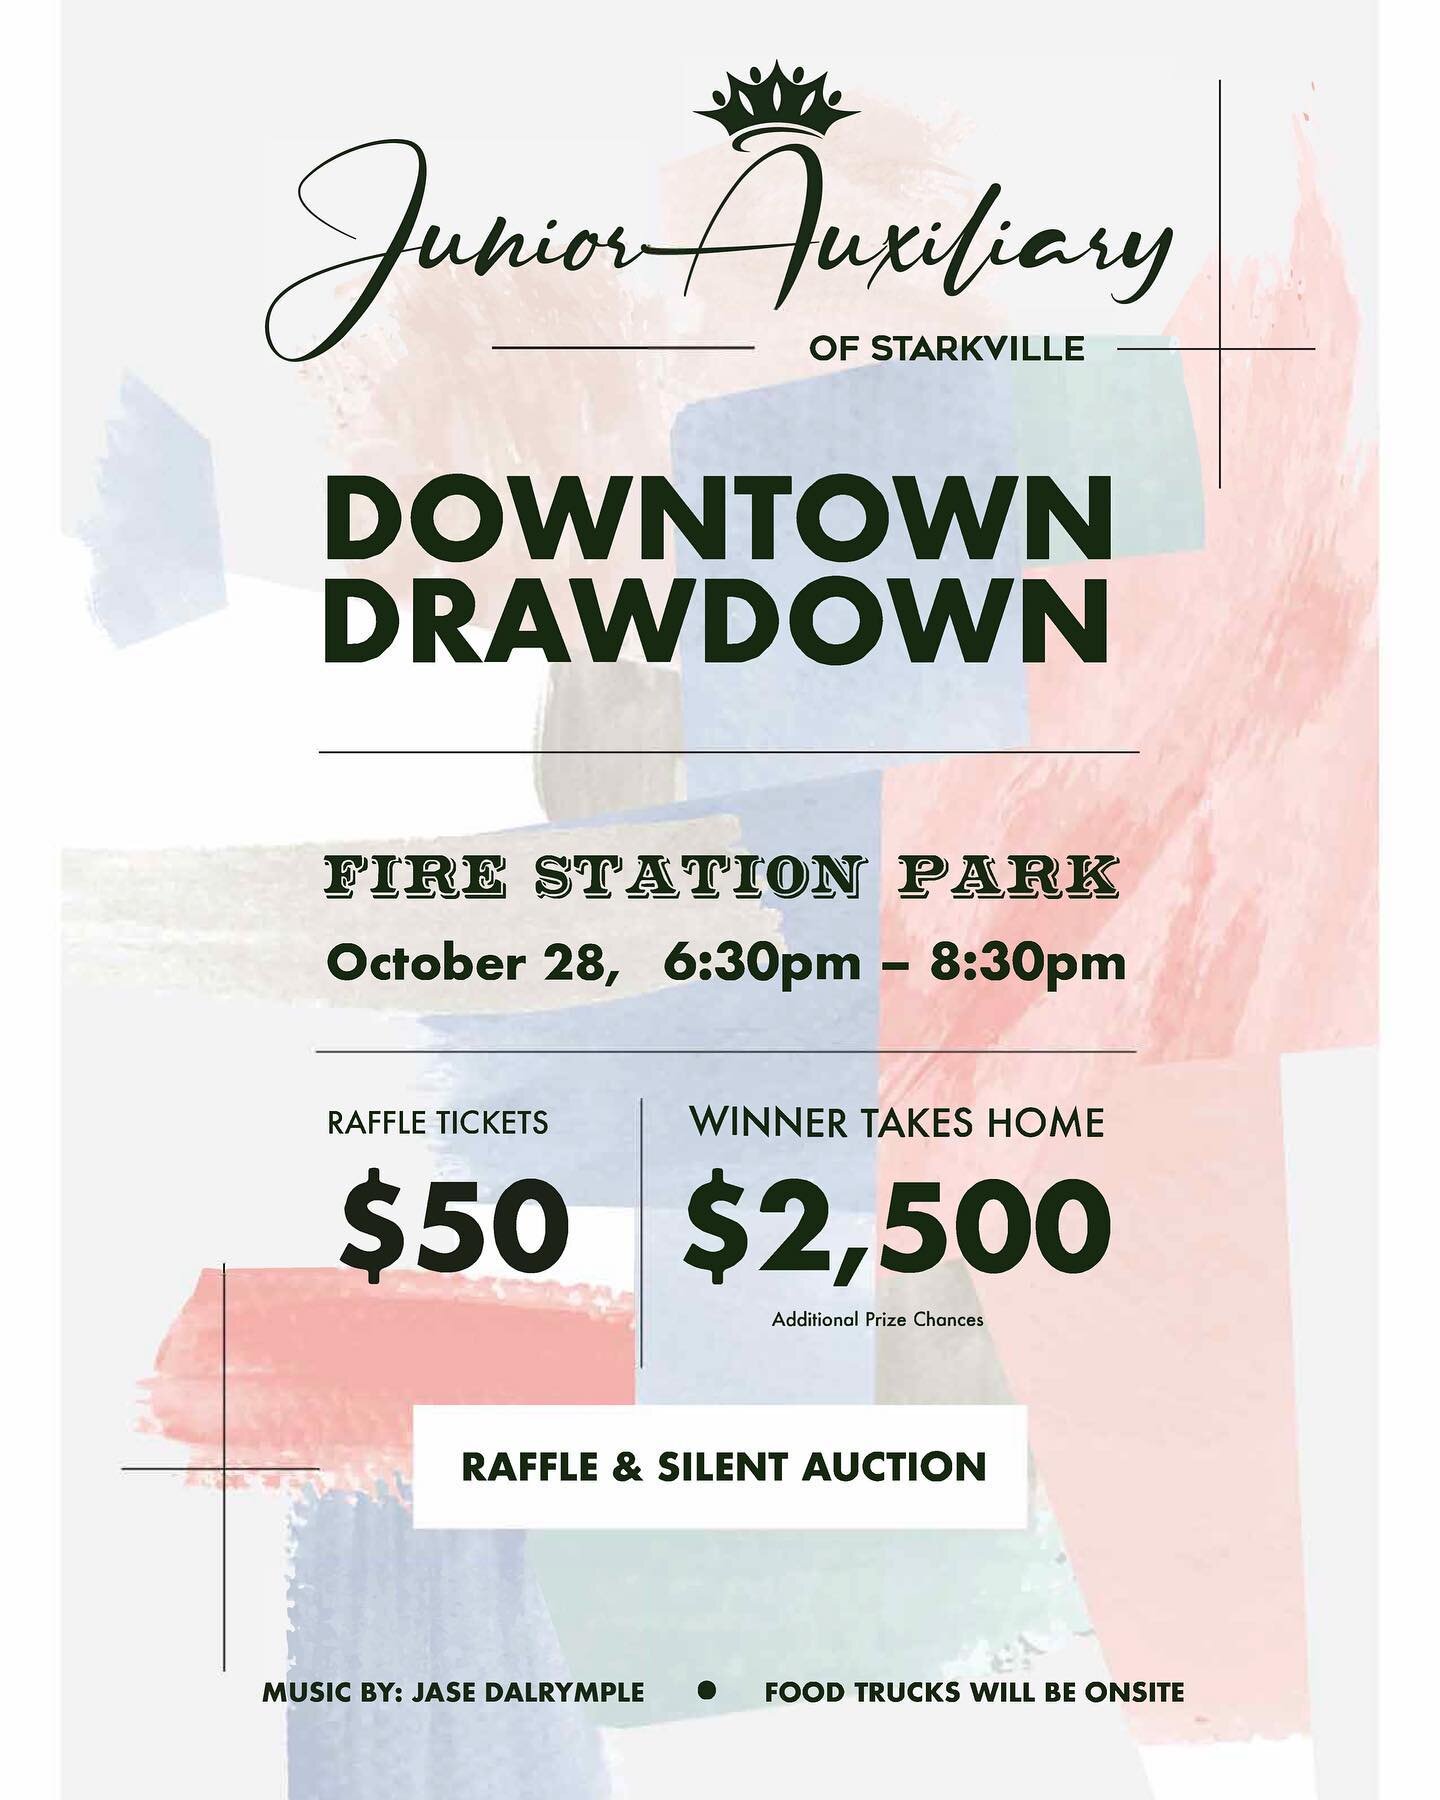 We are sooo excited about Downtown Drawdown!! Be on the lookout for sneak peaks into the event and behind the scenes planning and maybe even a chance to win a free drawdown ticket! Contact any JA member or DM us to purchase a ticket today!! 🎟 ✨